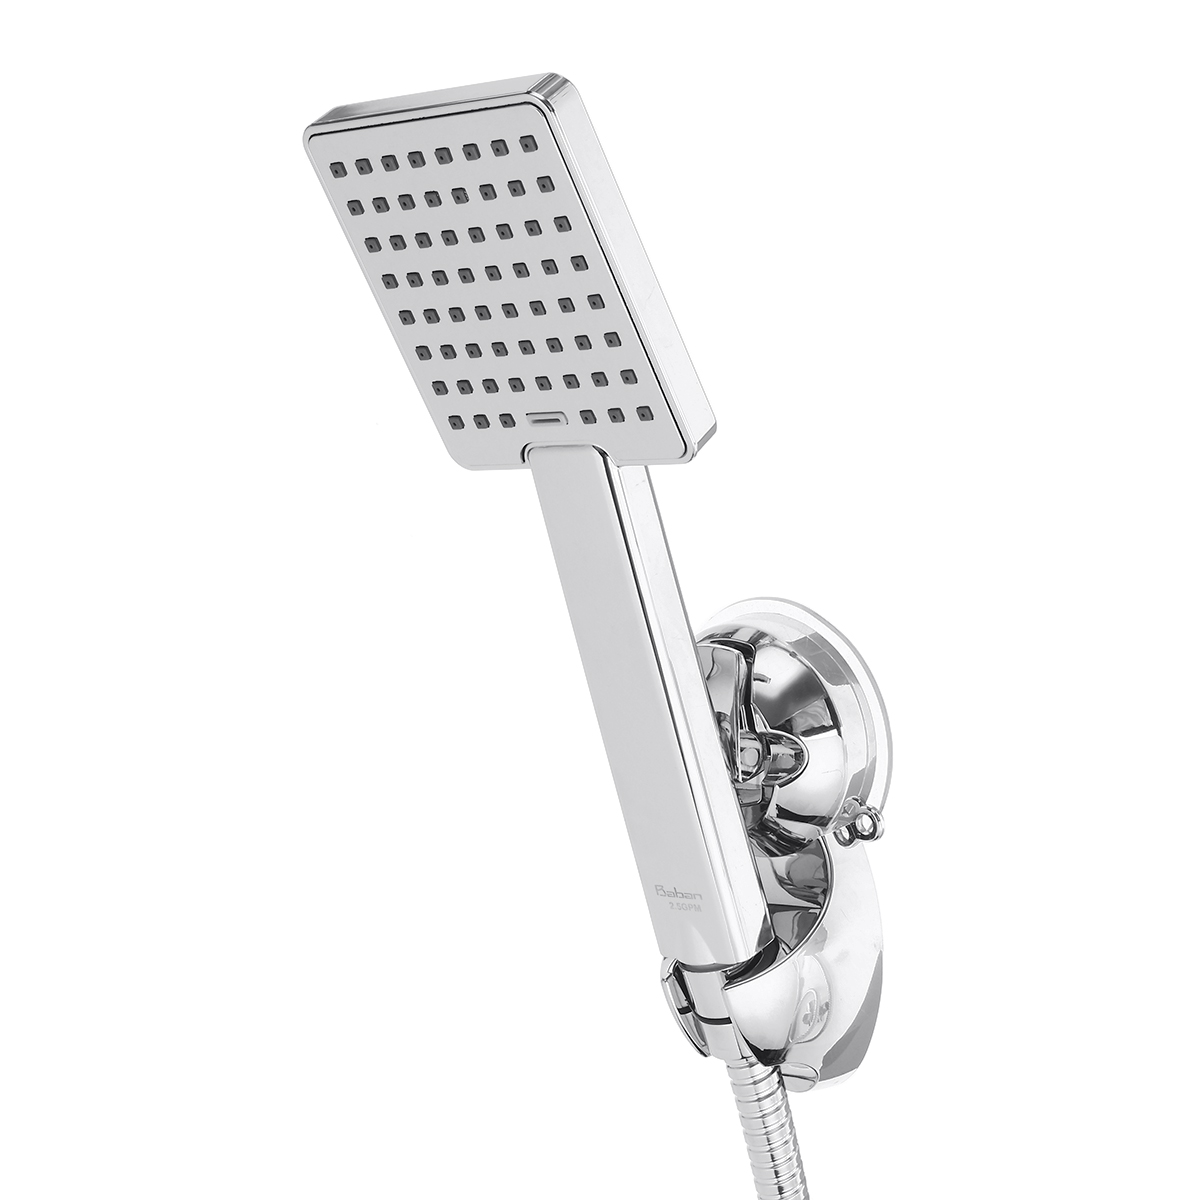 8-Inch-Large-Angle-adjustable-Square-Shower-Head-Electroplating-Five-Piece-Set-1710729-7